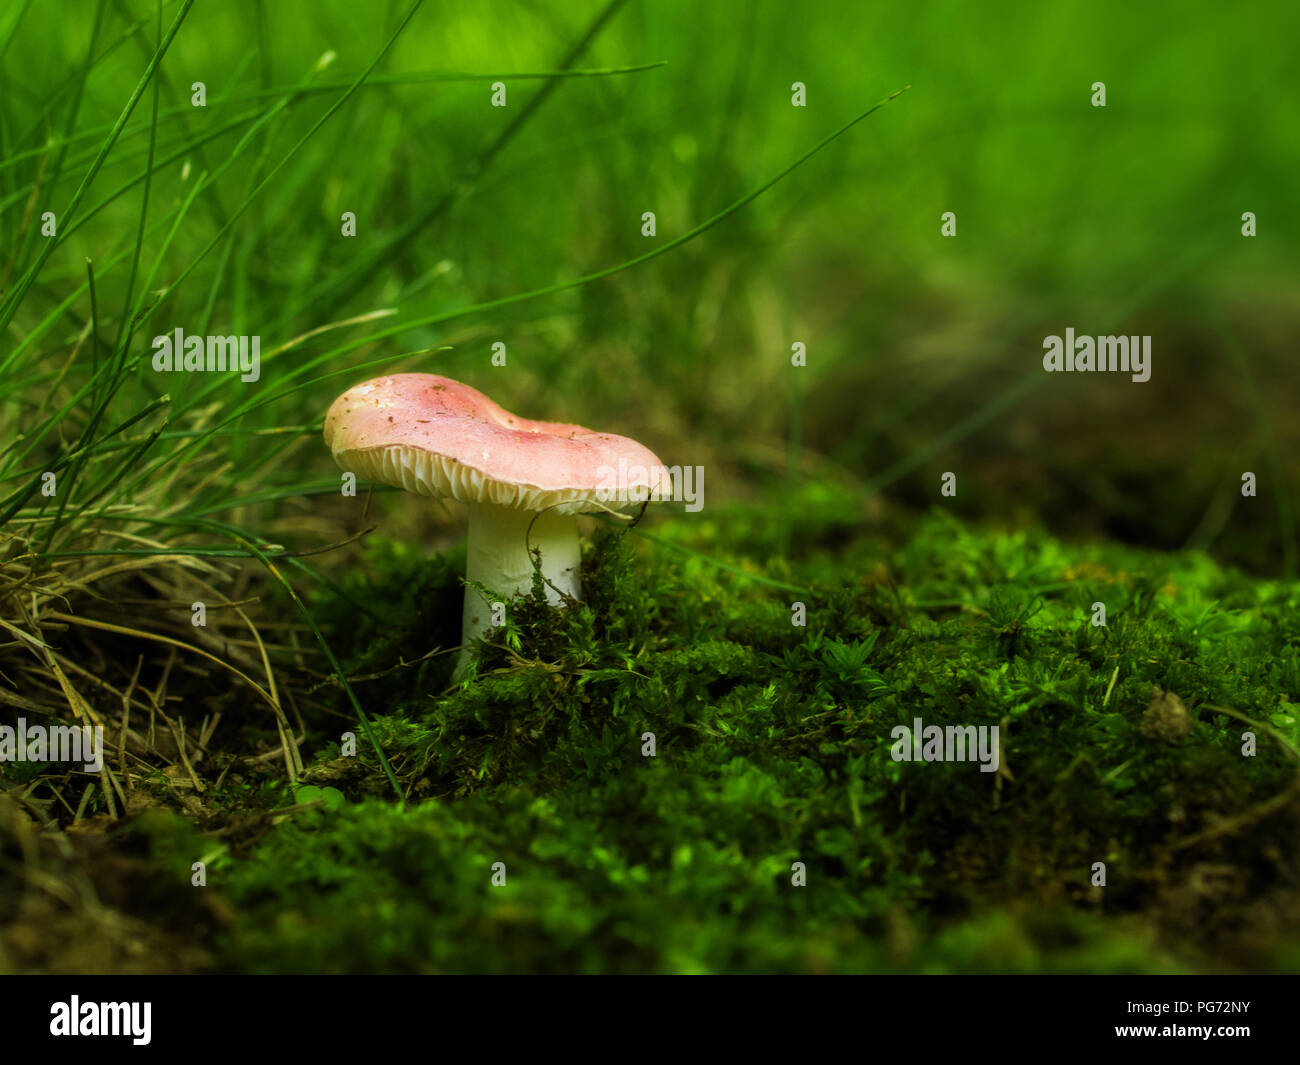 Mushroom in grass with moss Stock Photo